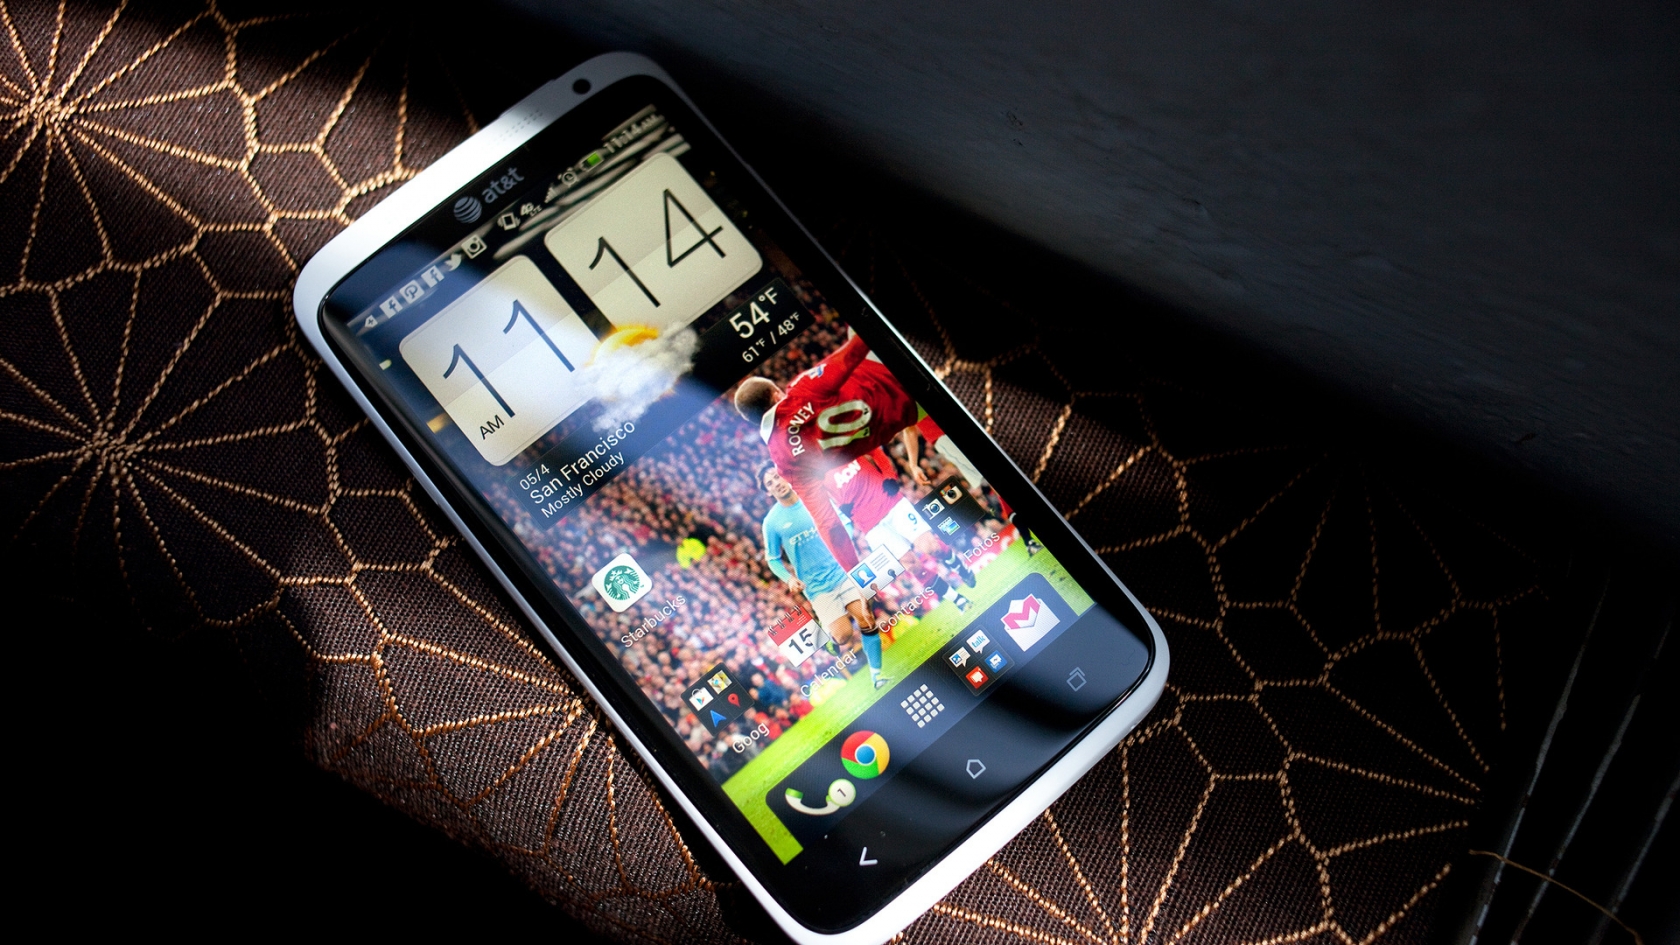 HTC One for 1680 x 945 HDTV resolution